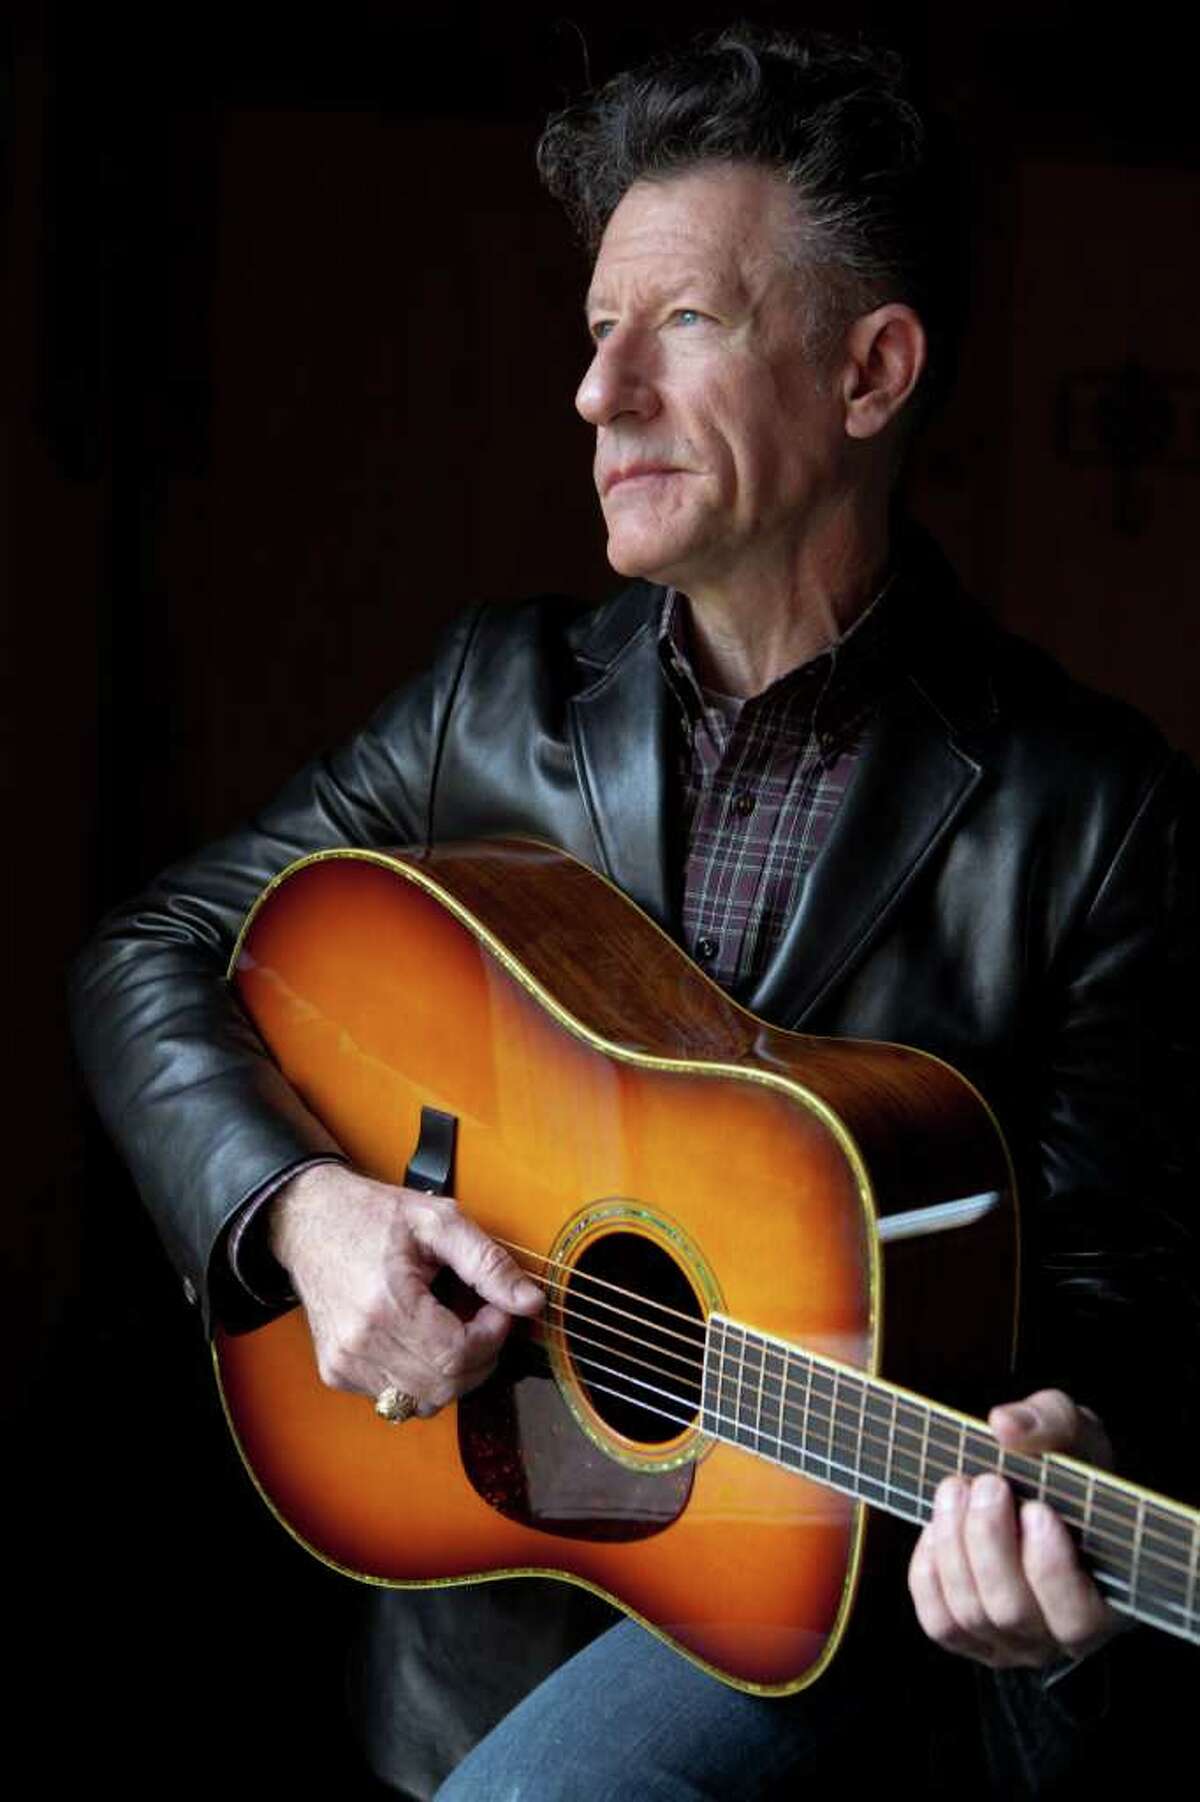 Lyle Lovett still makes his home in a Klein-area house where his grandfather used to live, and his hometown figures prominently in many of his songs.